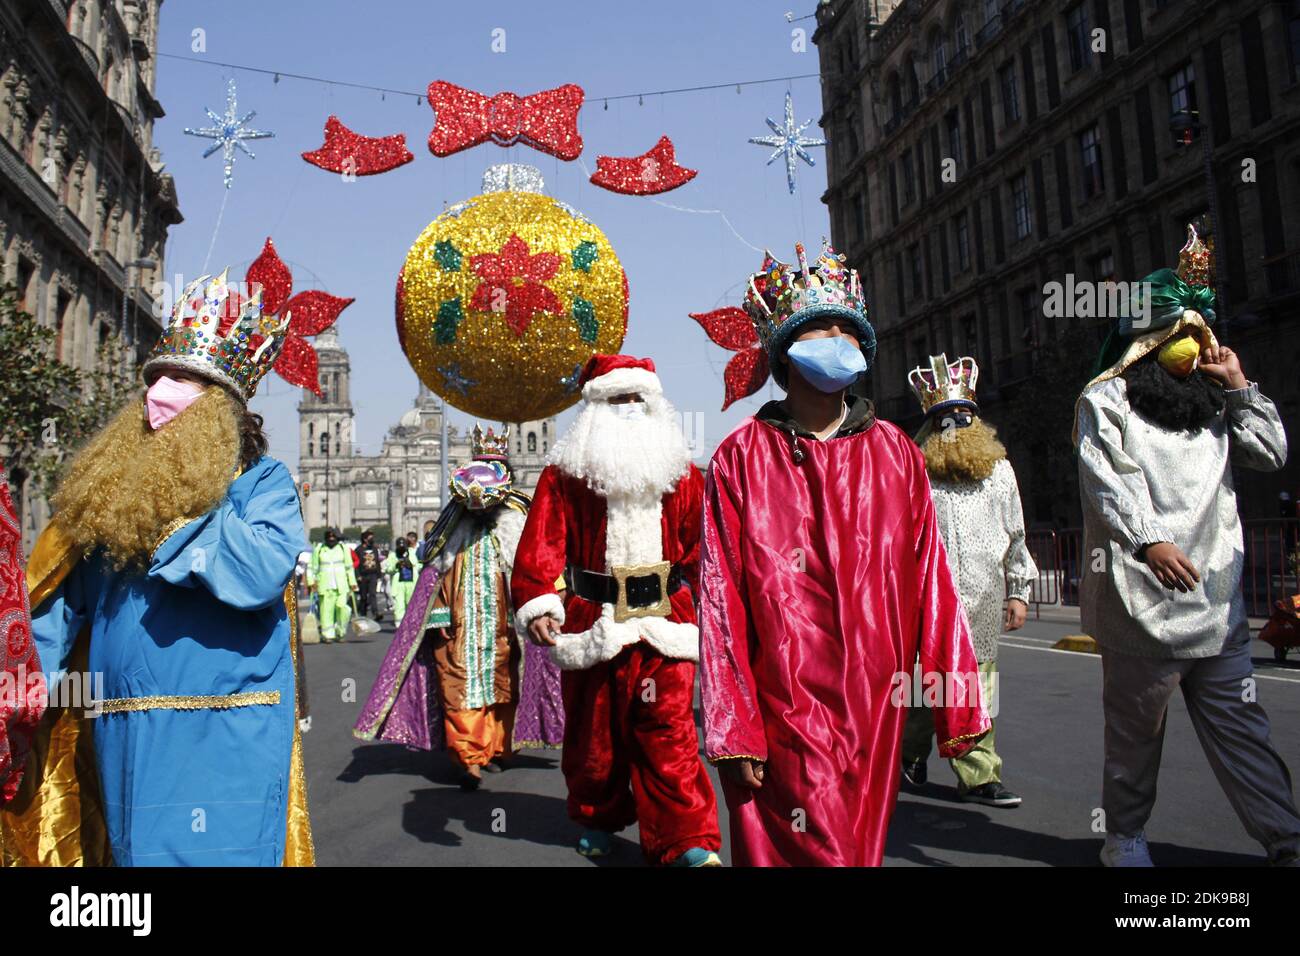 A person disguised as Santa Claus protests against Government of Mexico's president Andres Manuel Lopez Obrador due the increase in unemployment during the Covid-19 pandemic on December 14, 2020 in Mexico City, Mexico. Photo by Victor De La Cruz/Eyepix/ABACAPRESS.COM Stock Photo